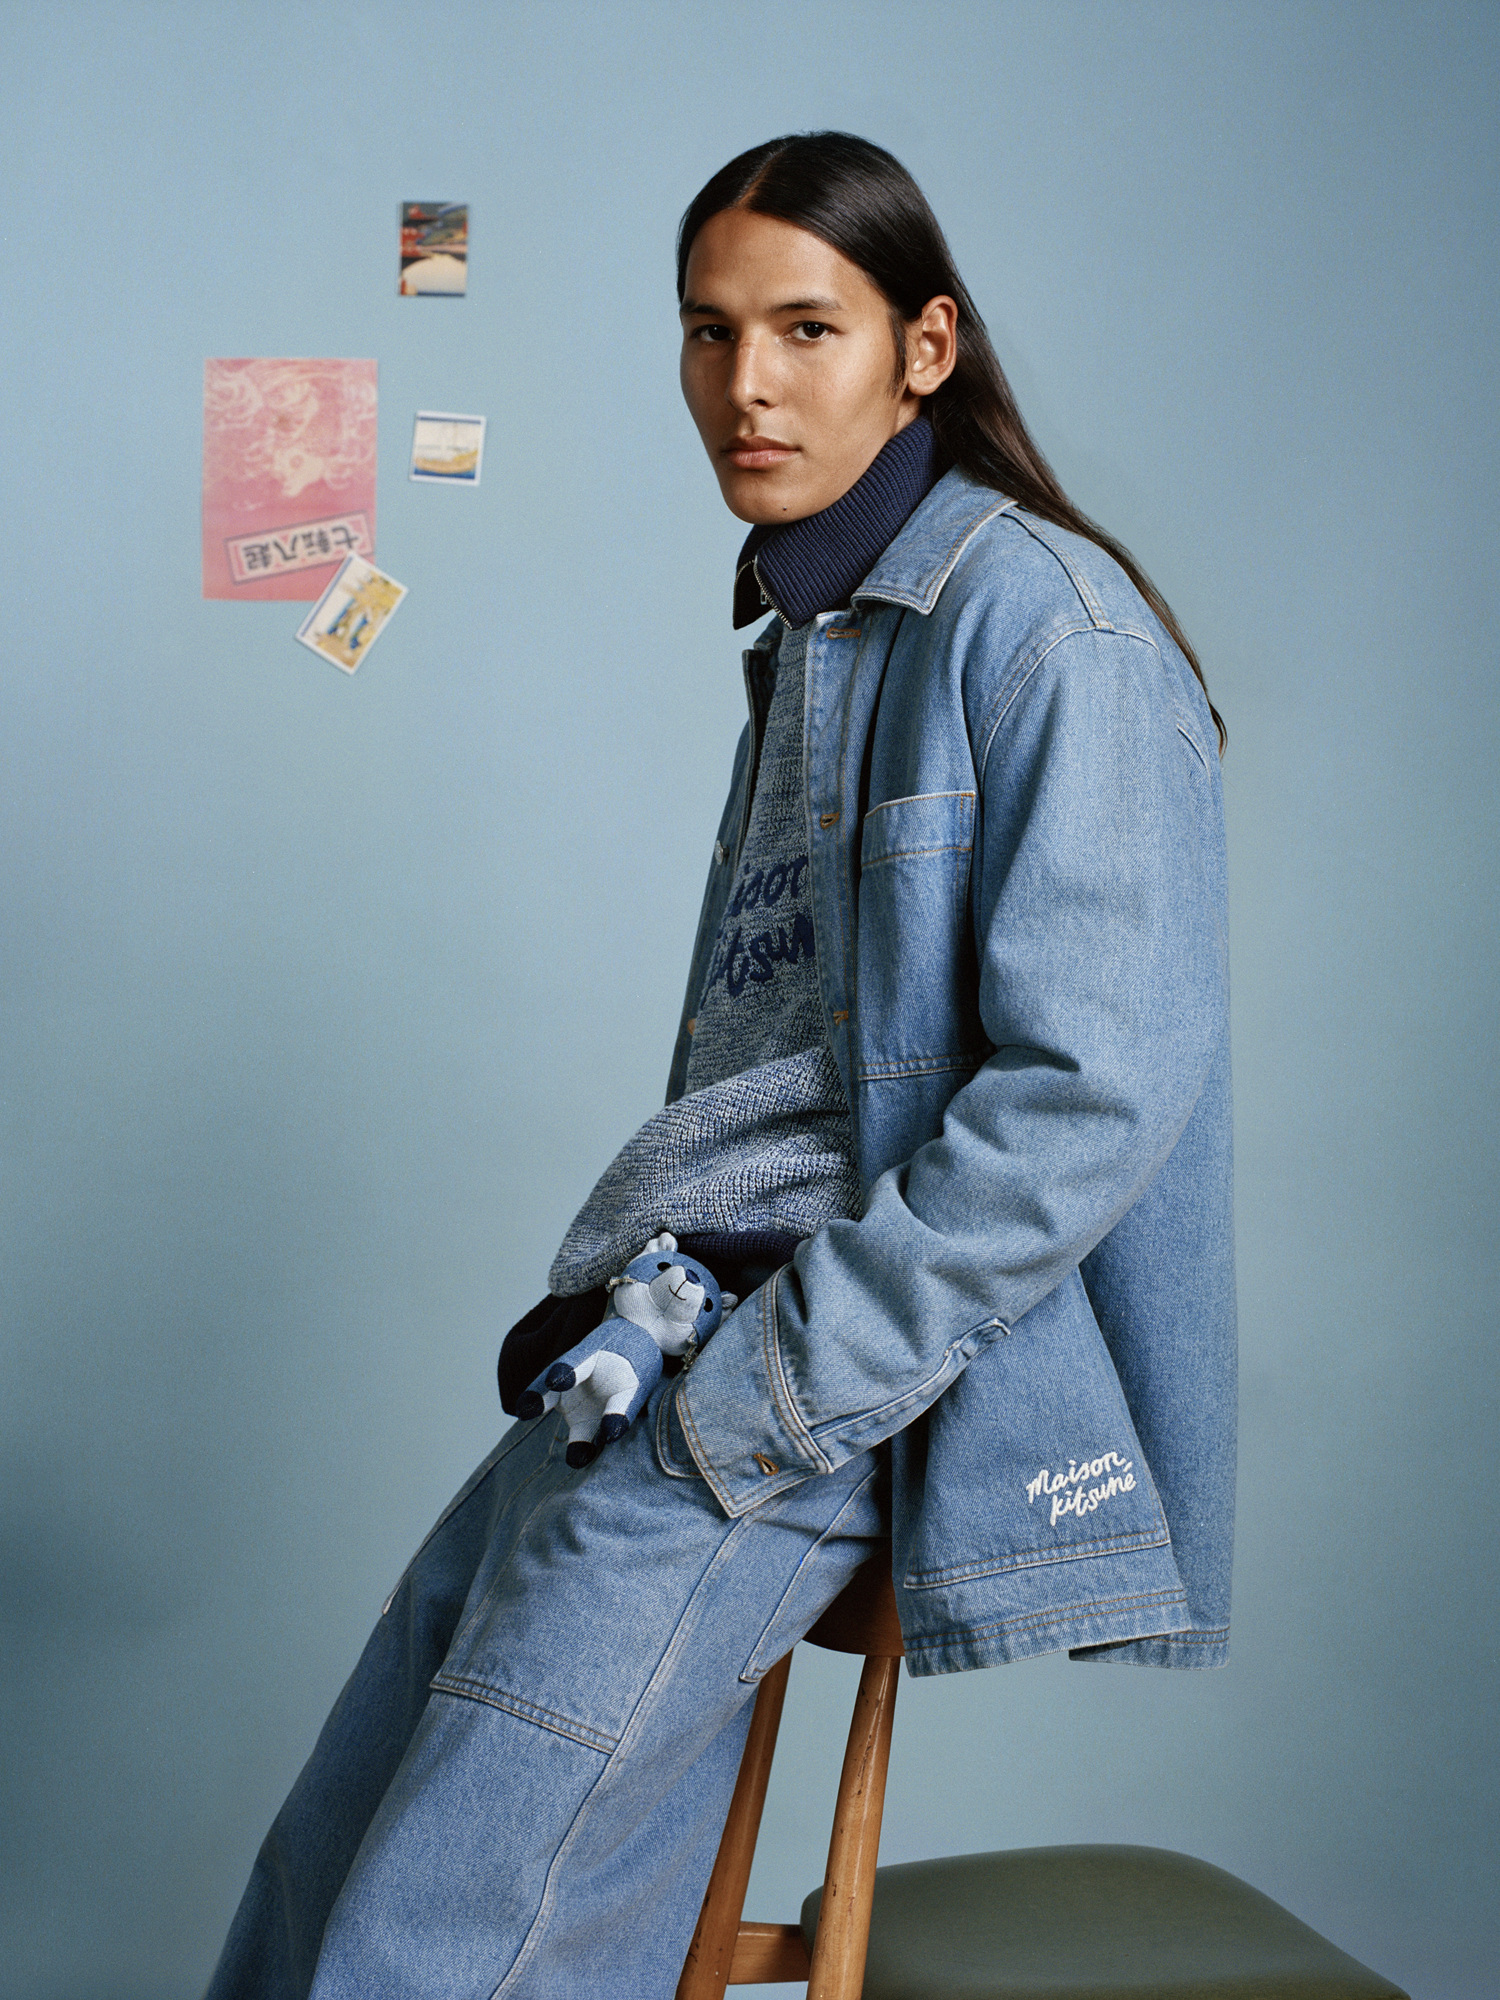 A classic denim-on-denim look from Maison Kitsuné is shown here.